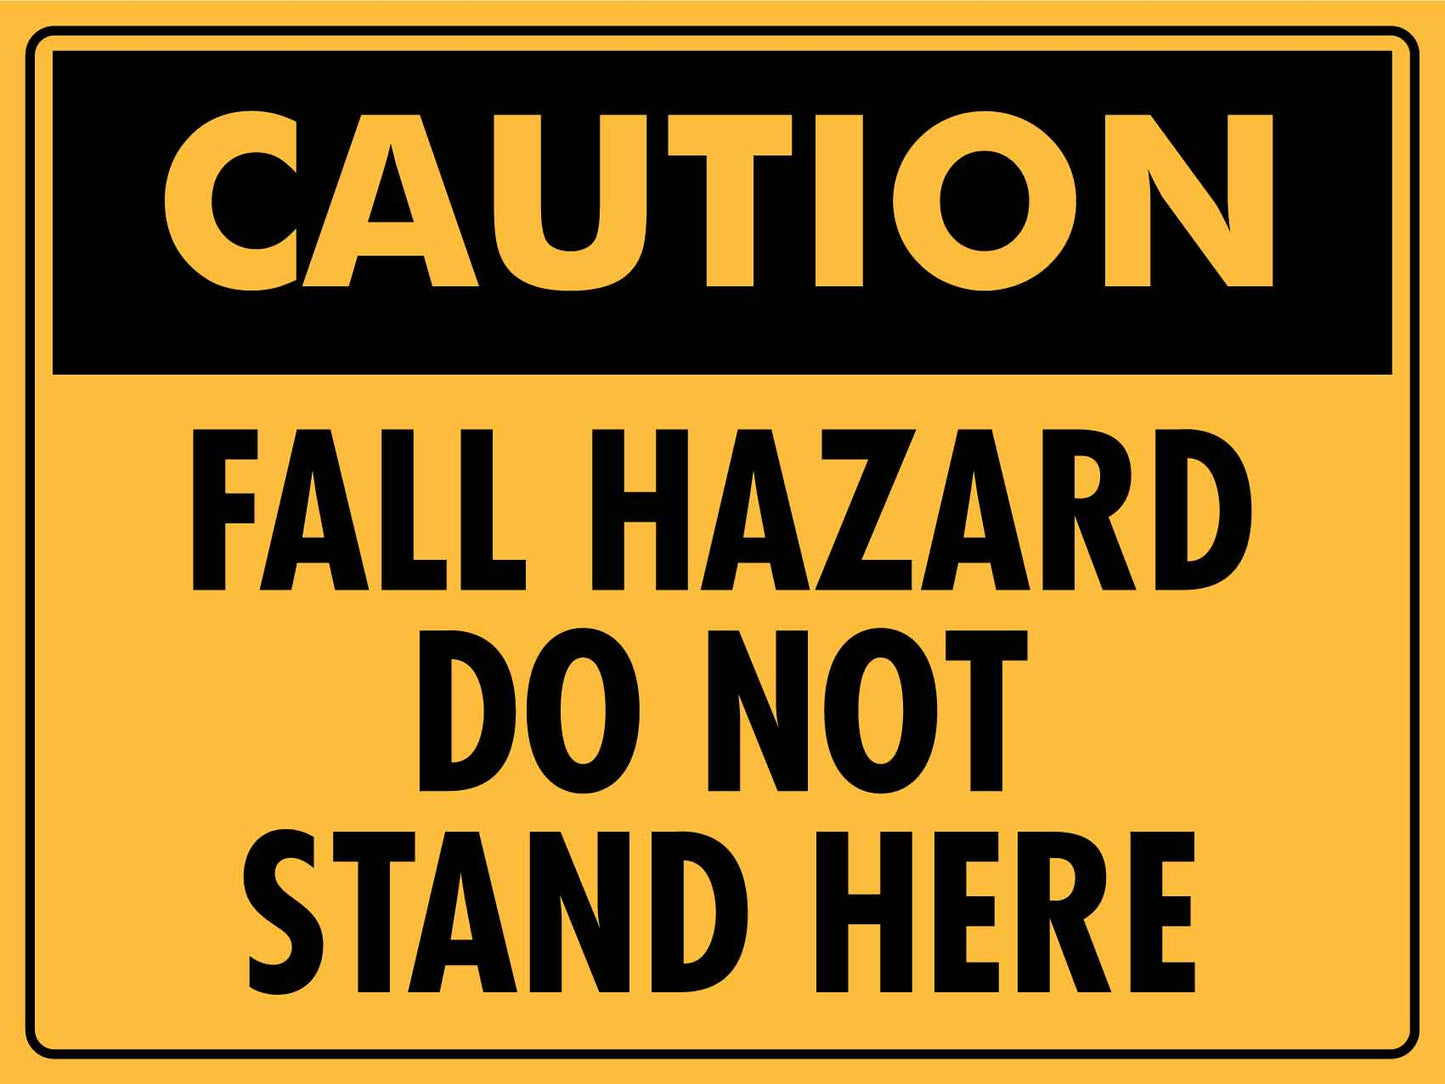 Caution Fall Hazard Do Not Stand Here Sign